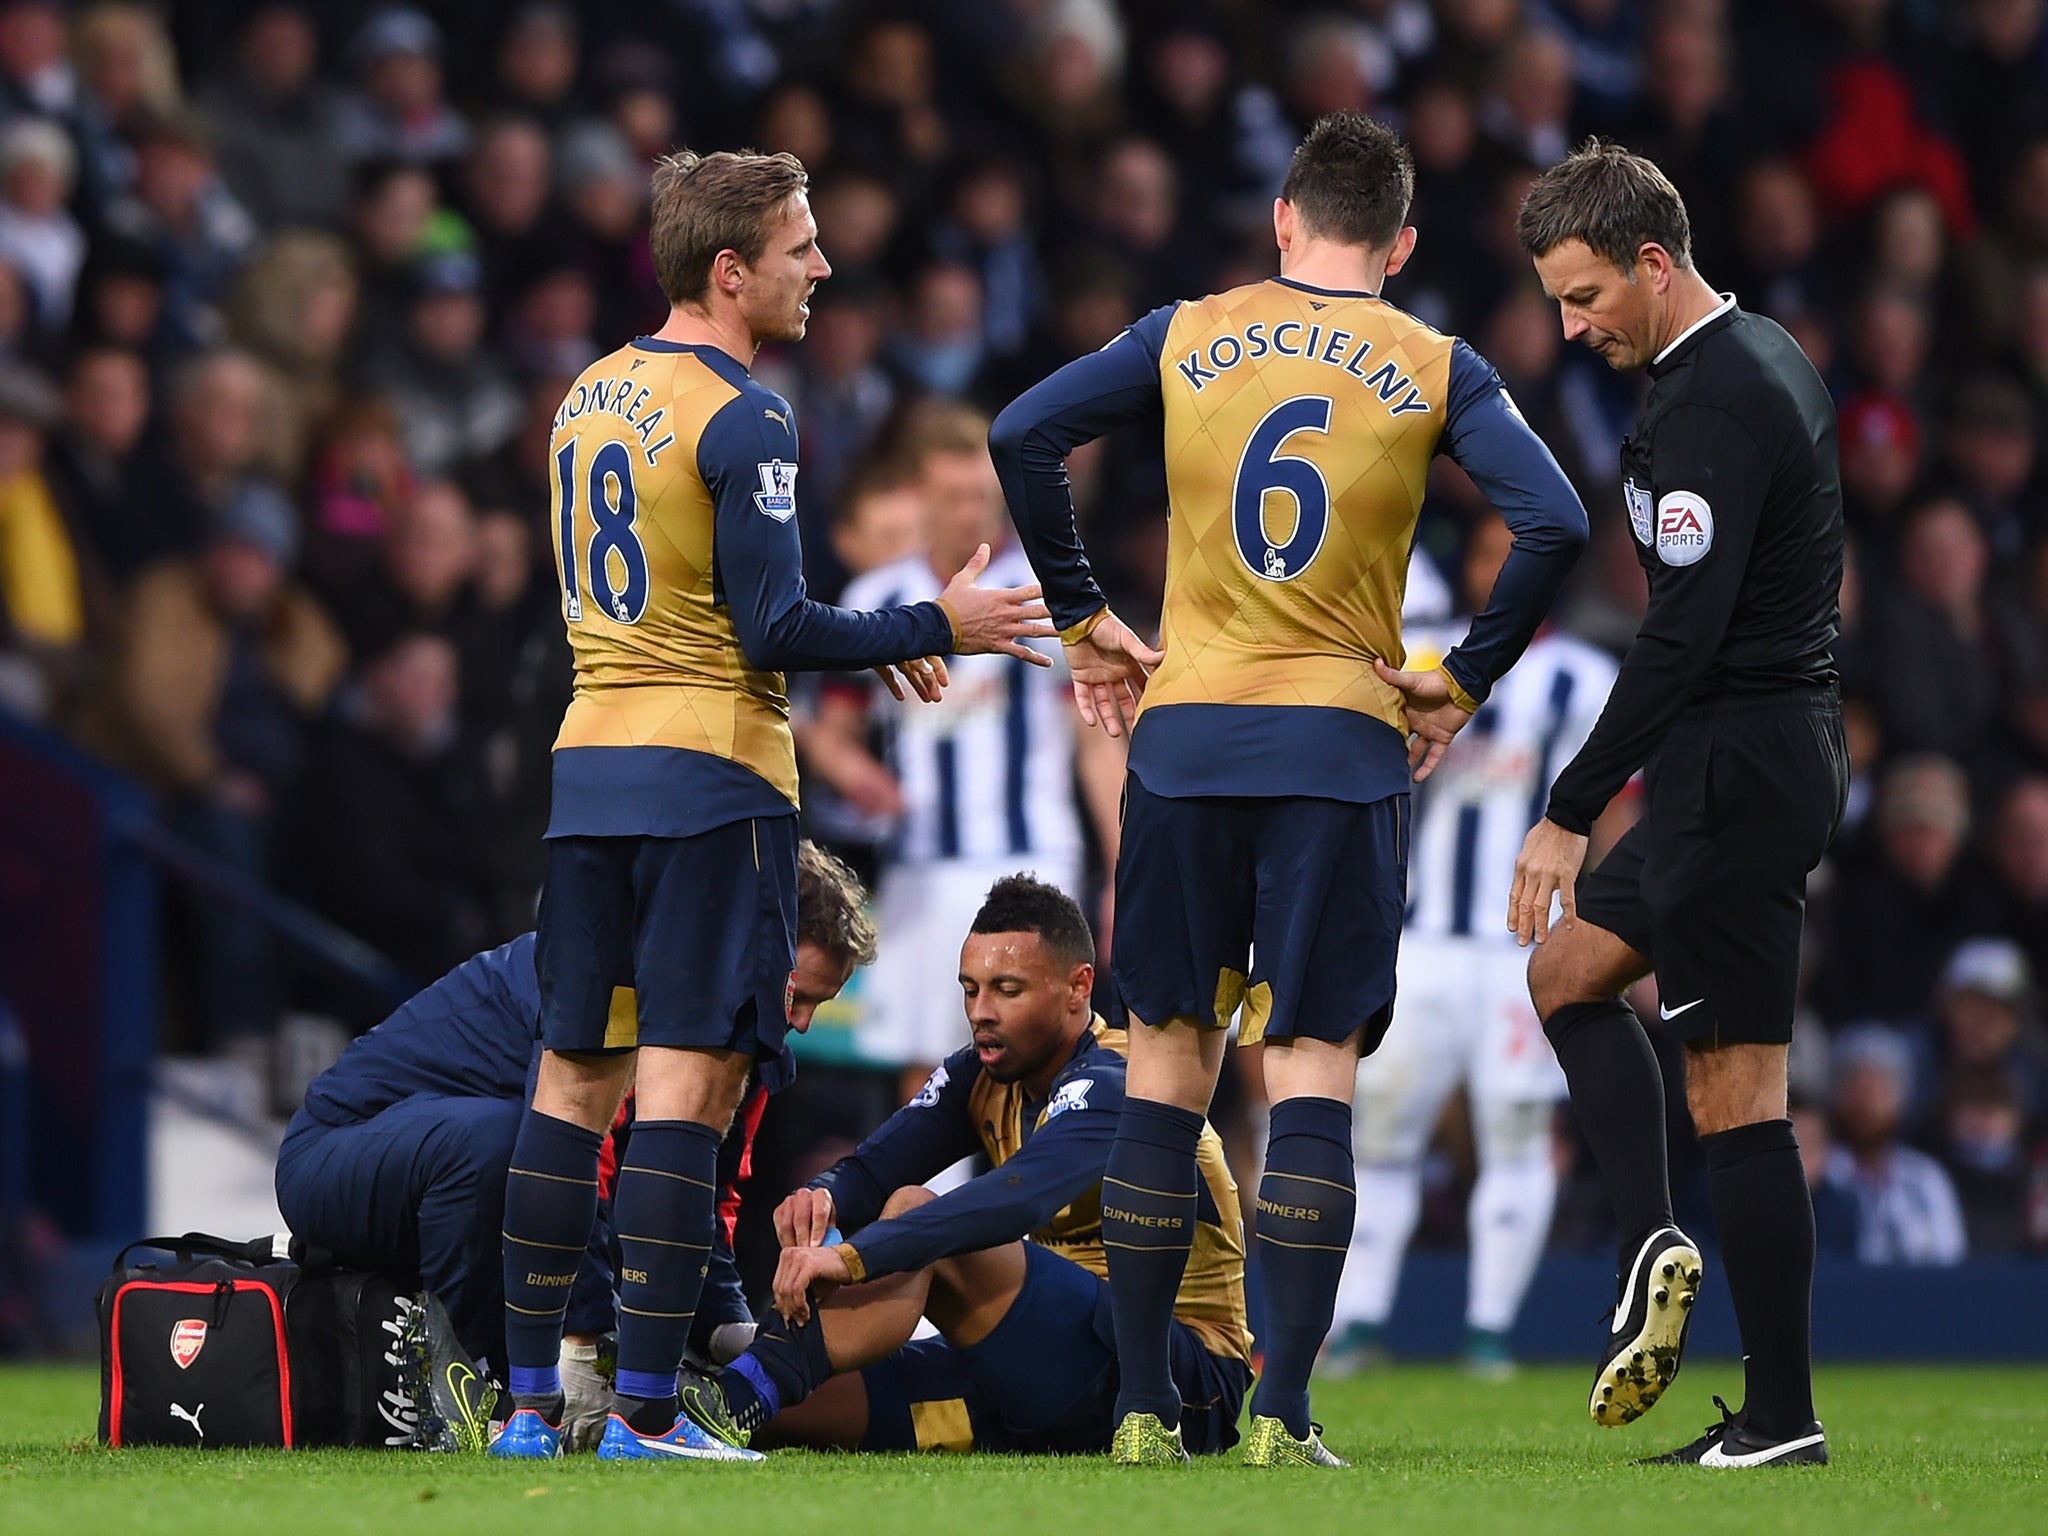 Coquelin was injured during Arsenal's 2-1 defeat to West Brom